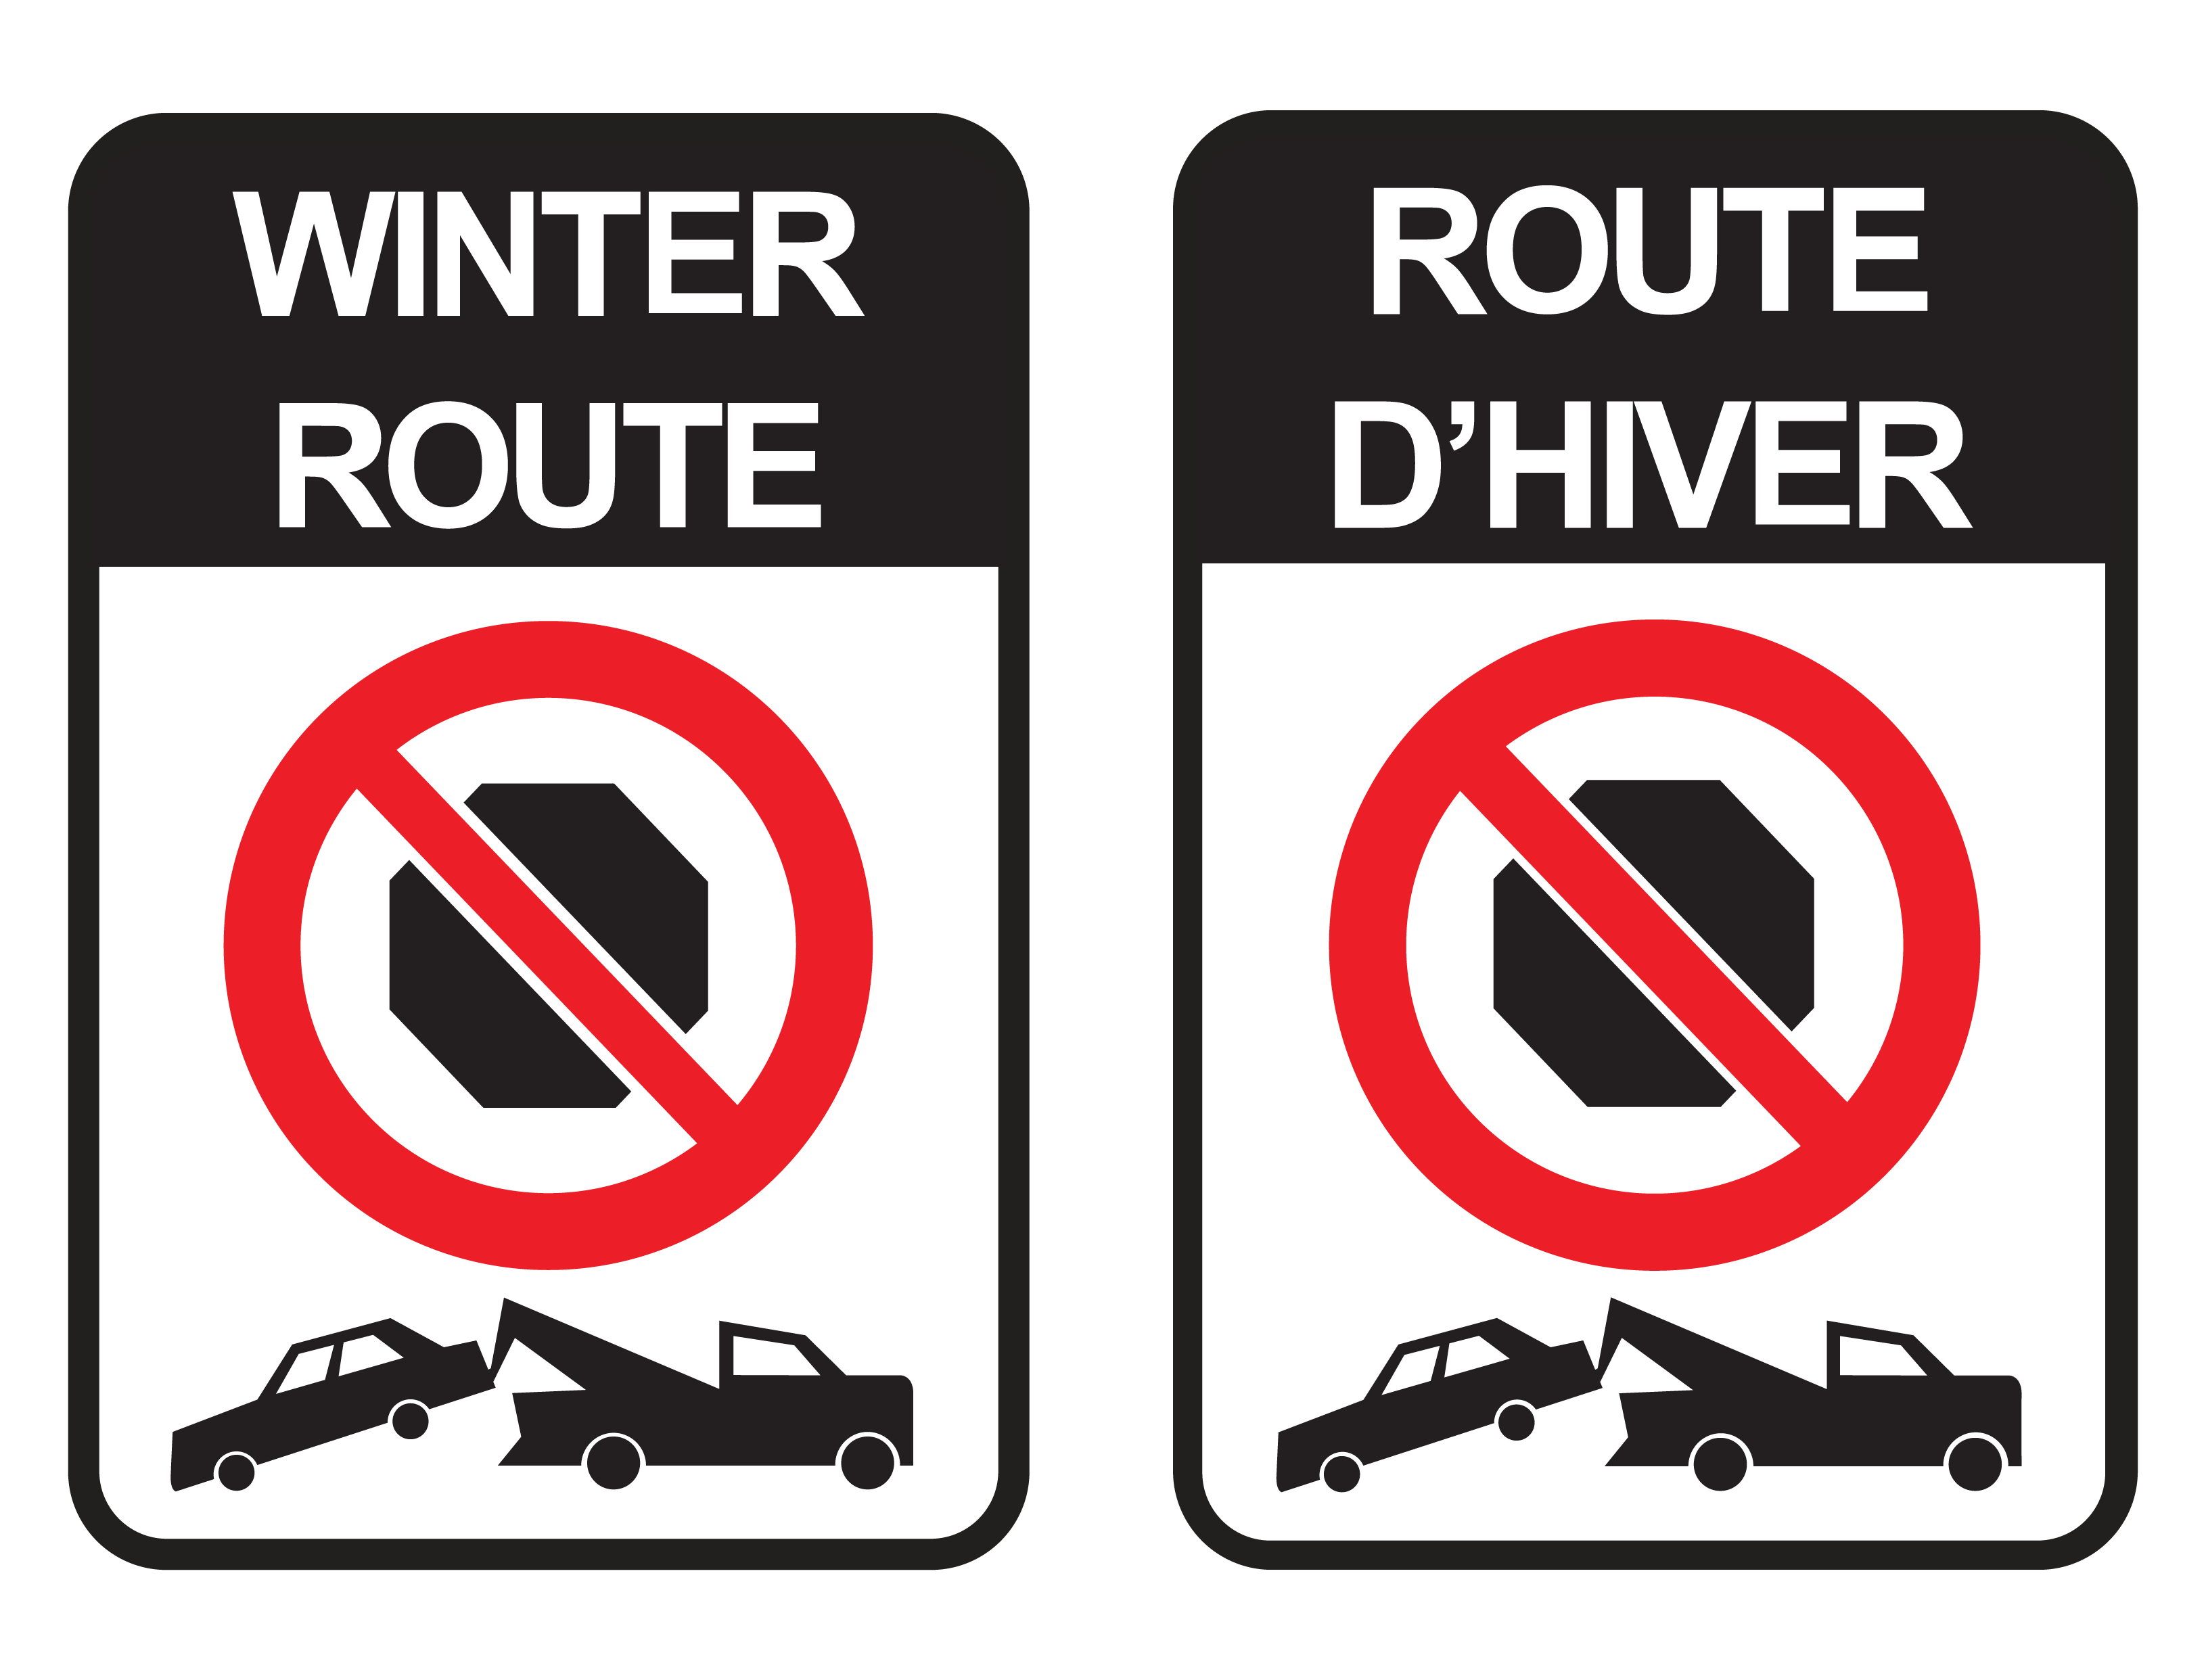 Winter route parking signage in English and French. Each sign has a no stopping and tow symbol on it.